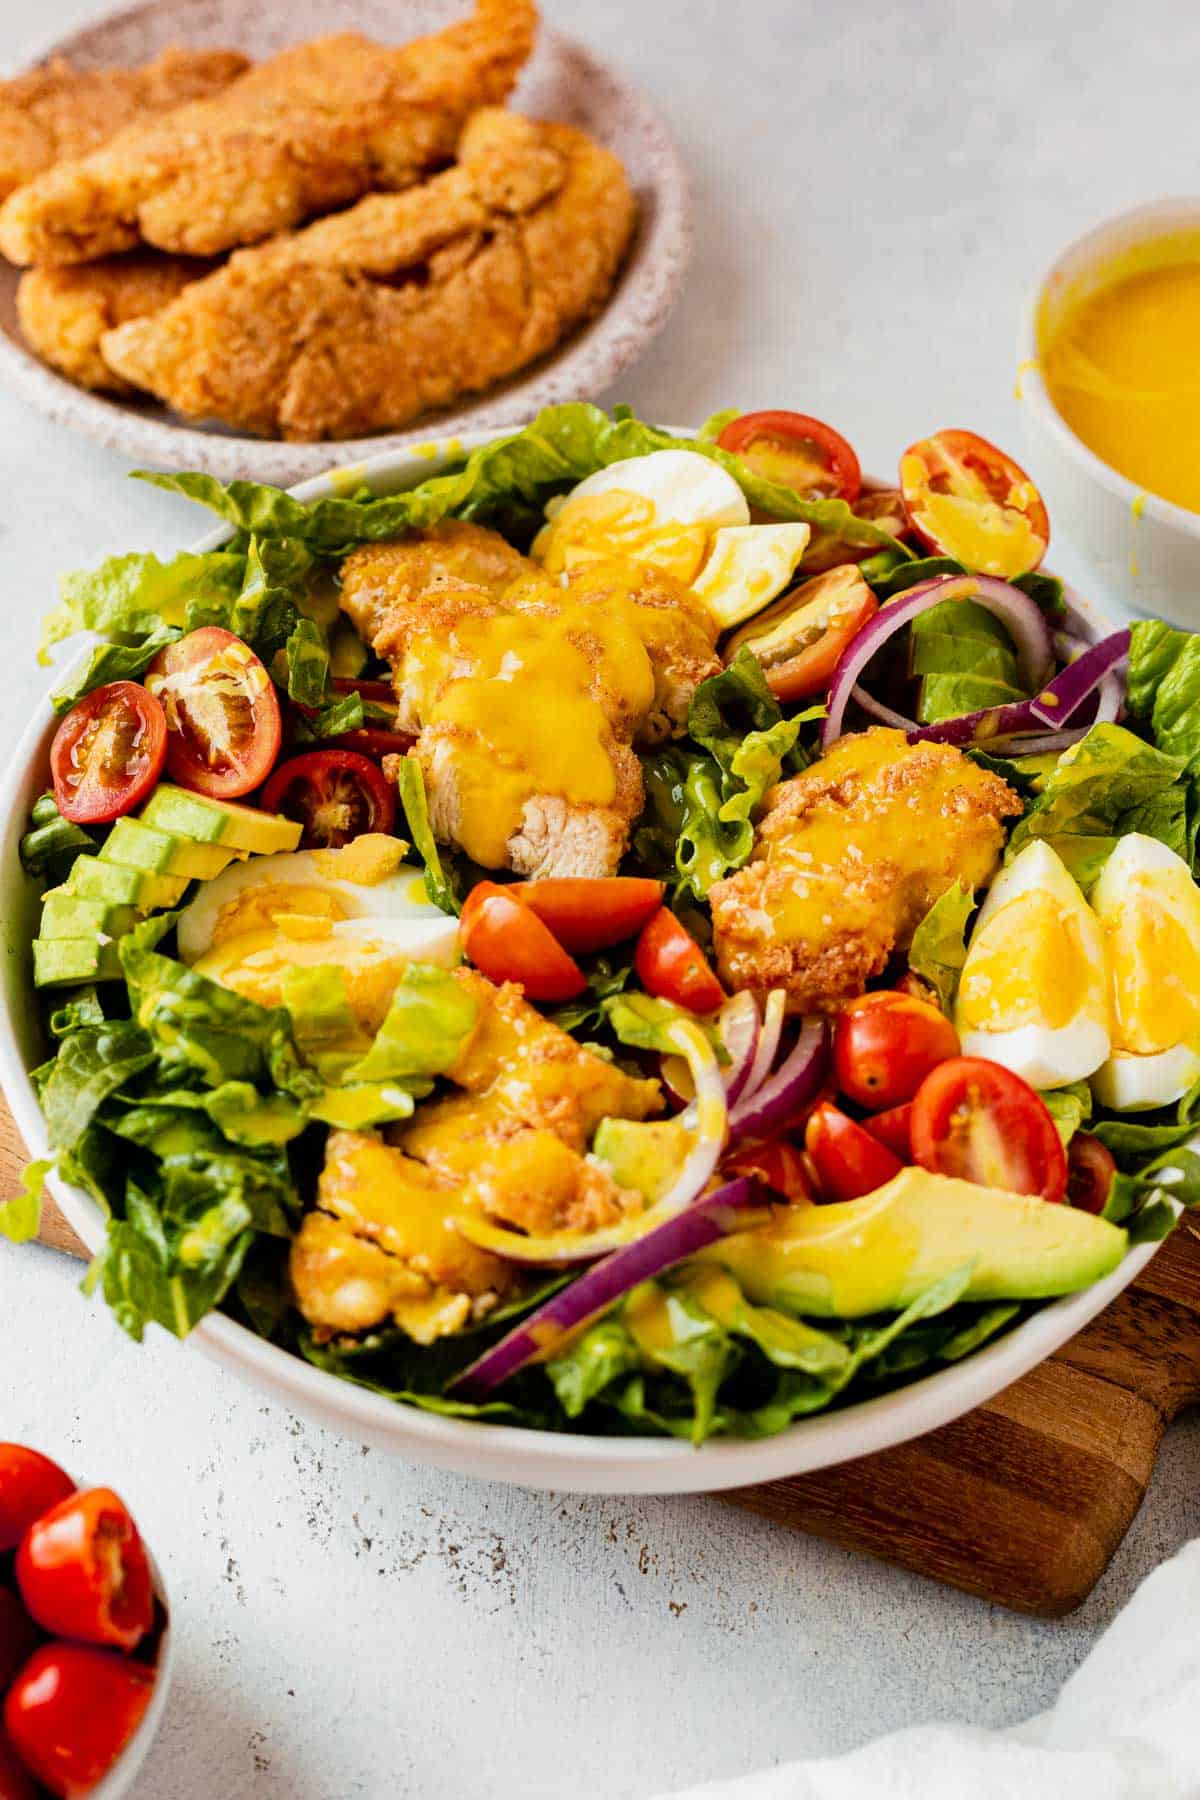 crispy chicken salad with eggs, avocado, and tomatoes